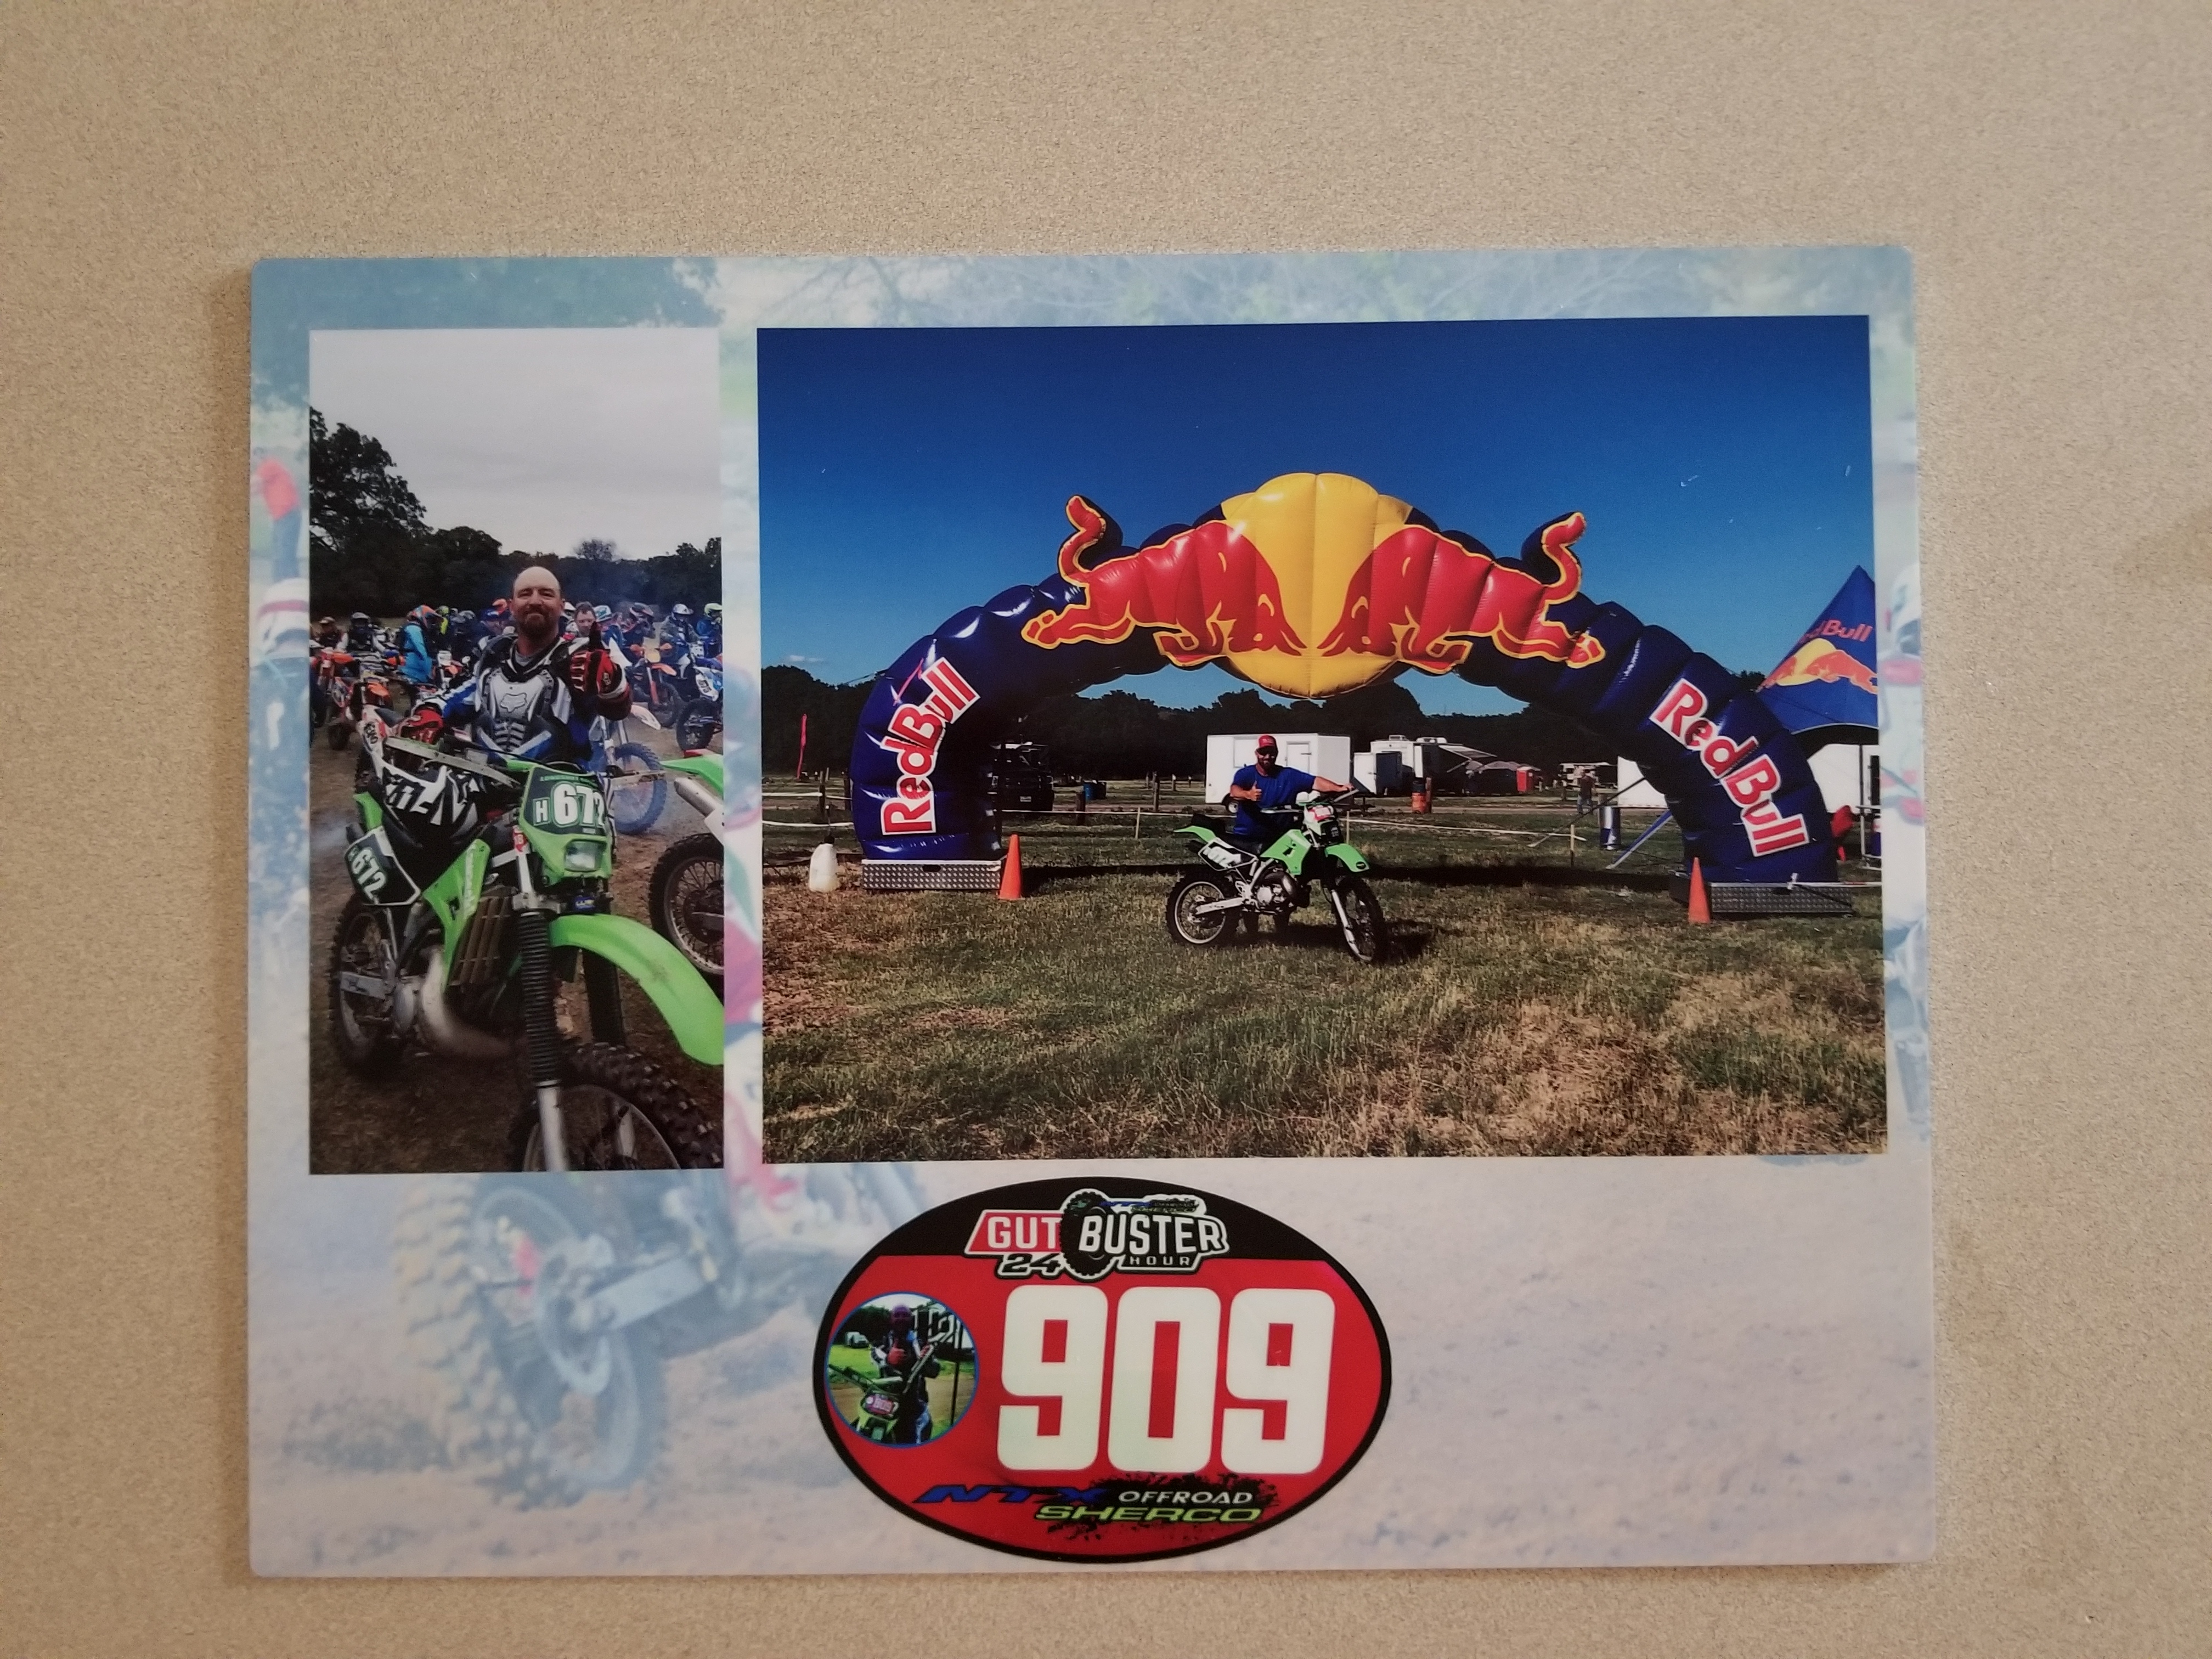 Pictures is the winner of a dirt bike race. Background picture is him during the race. It's 50%